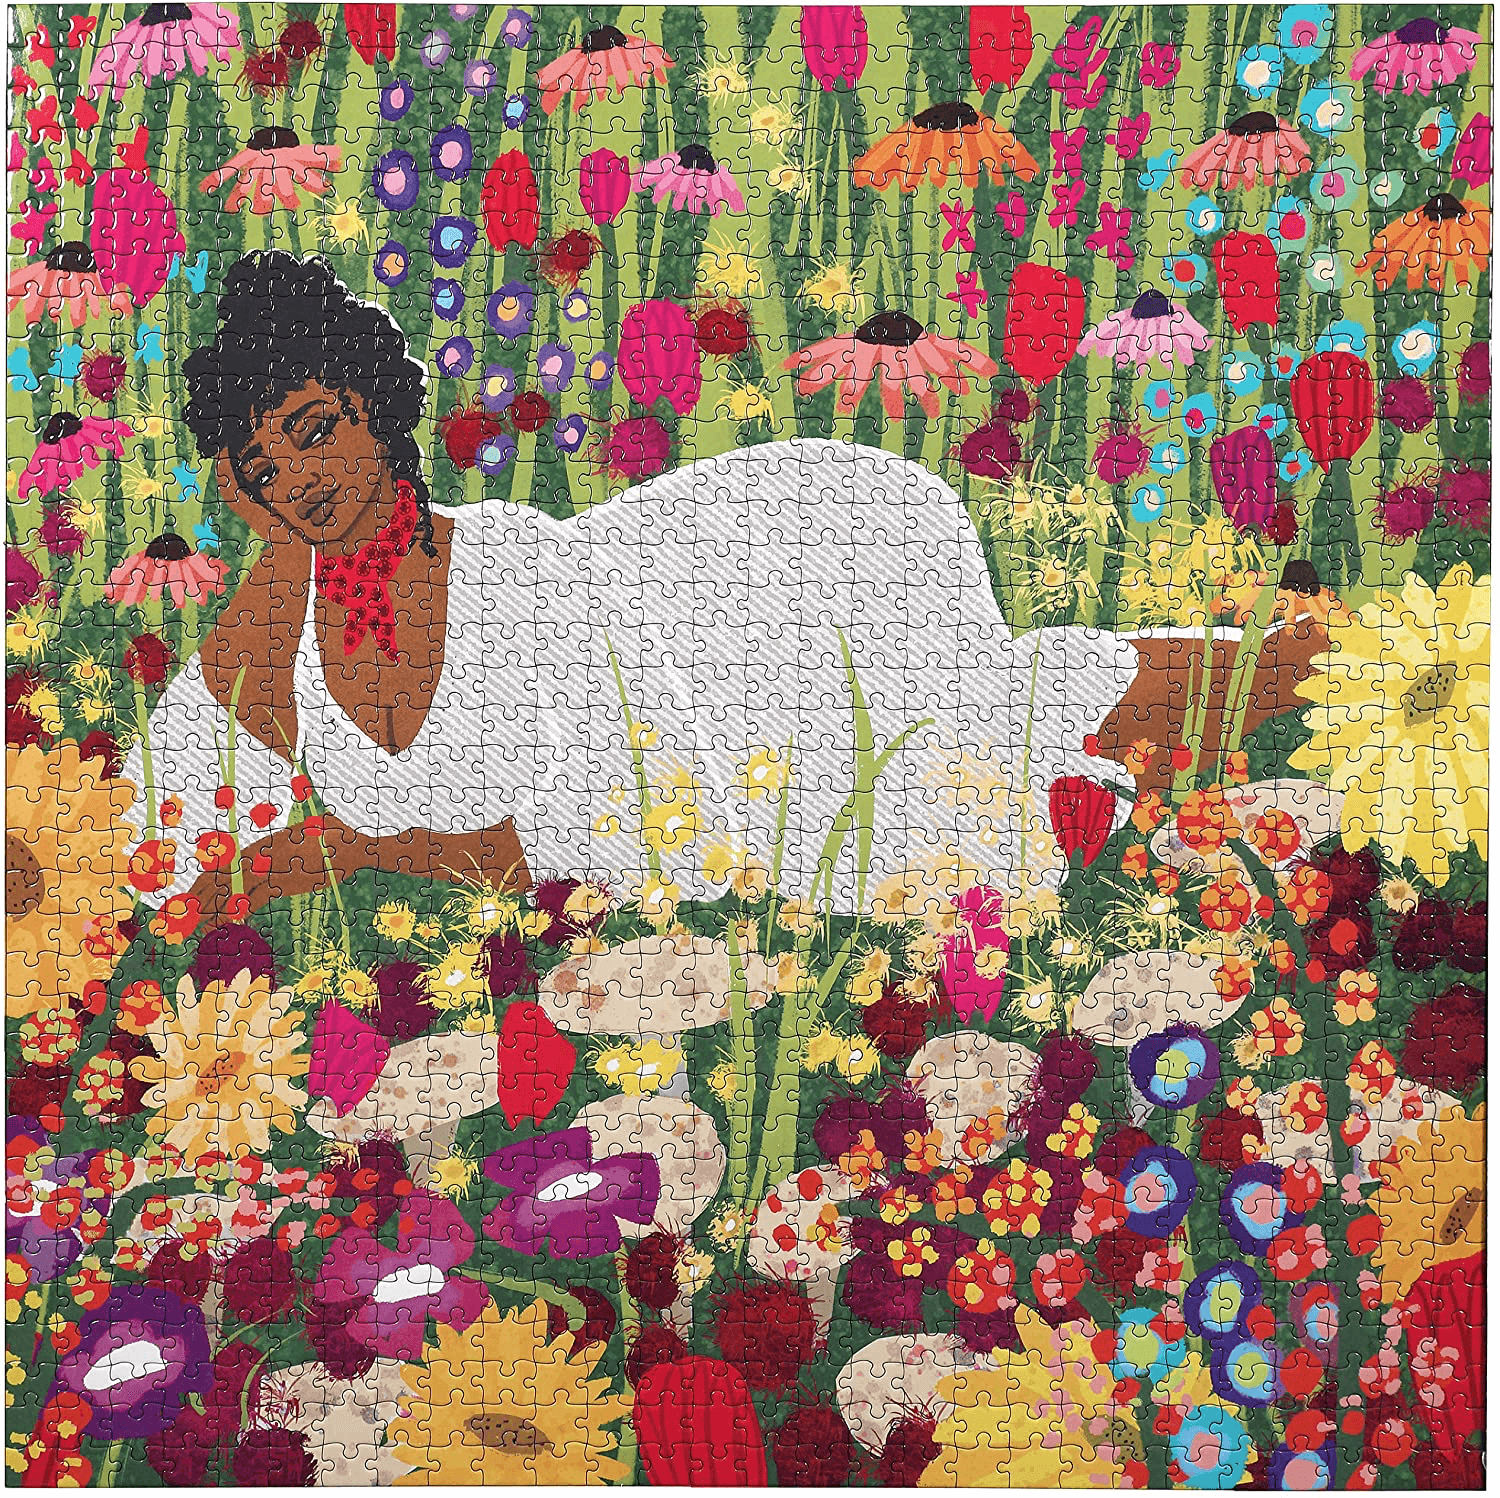 eeBoo - Piece and Love Woman in Flowers 1000 Piece Square Adult Jigsaw Puzzle completed puzzle